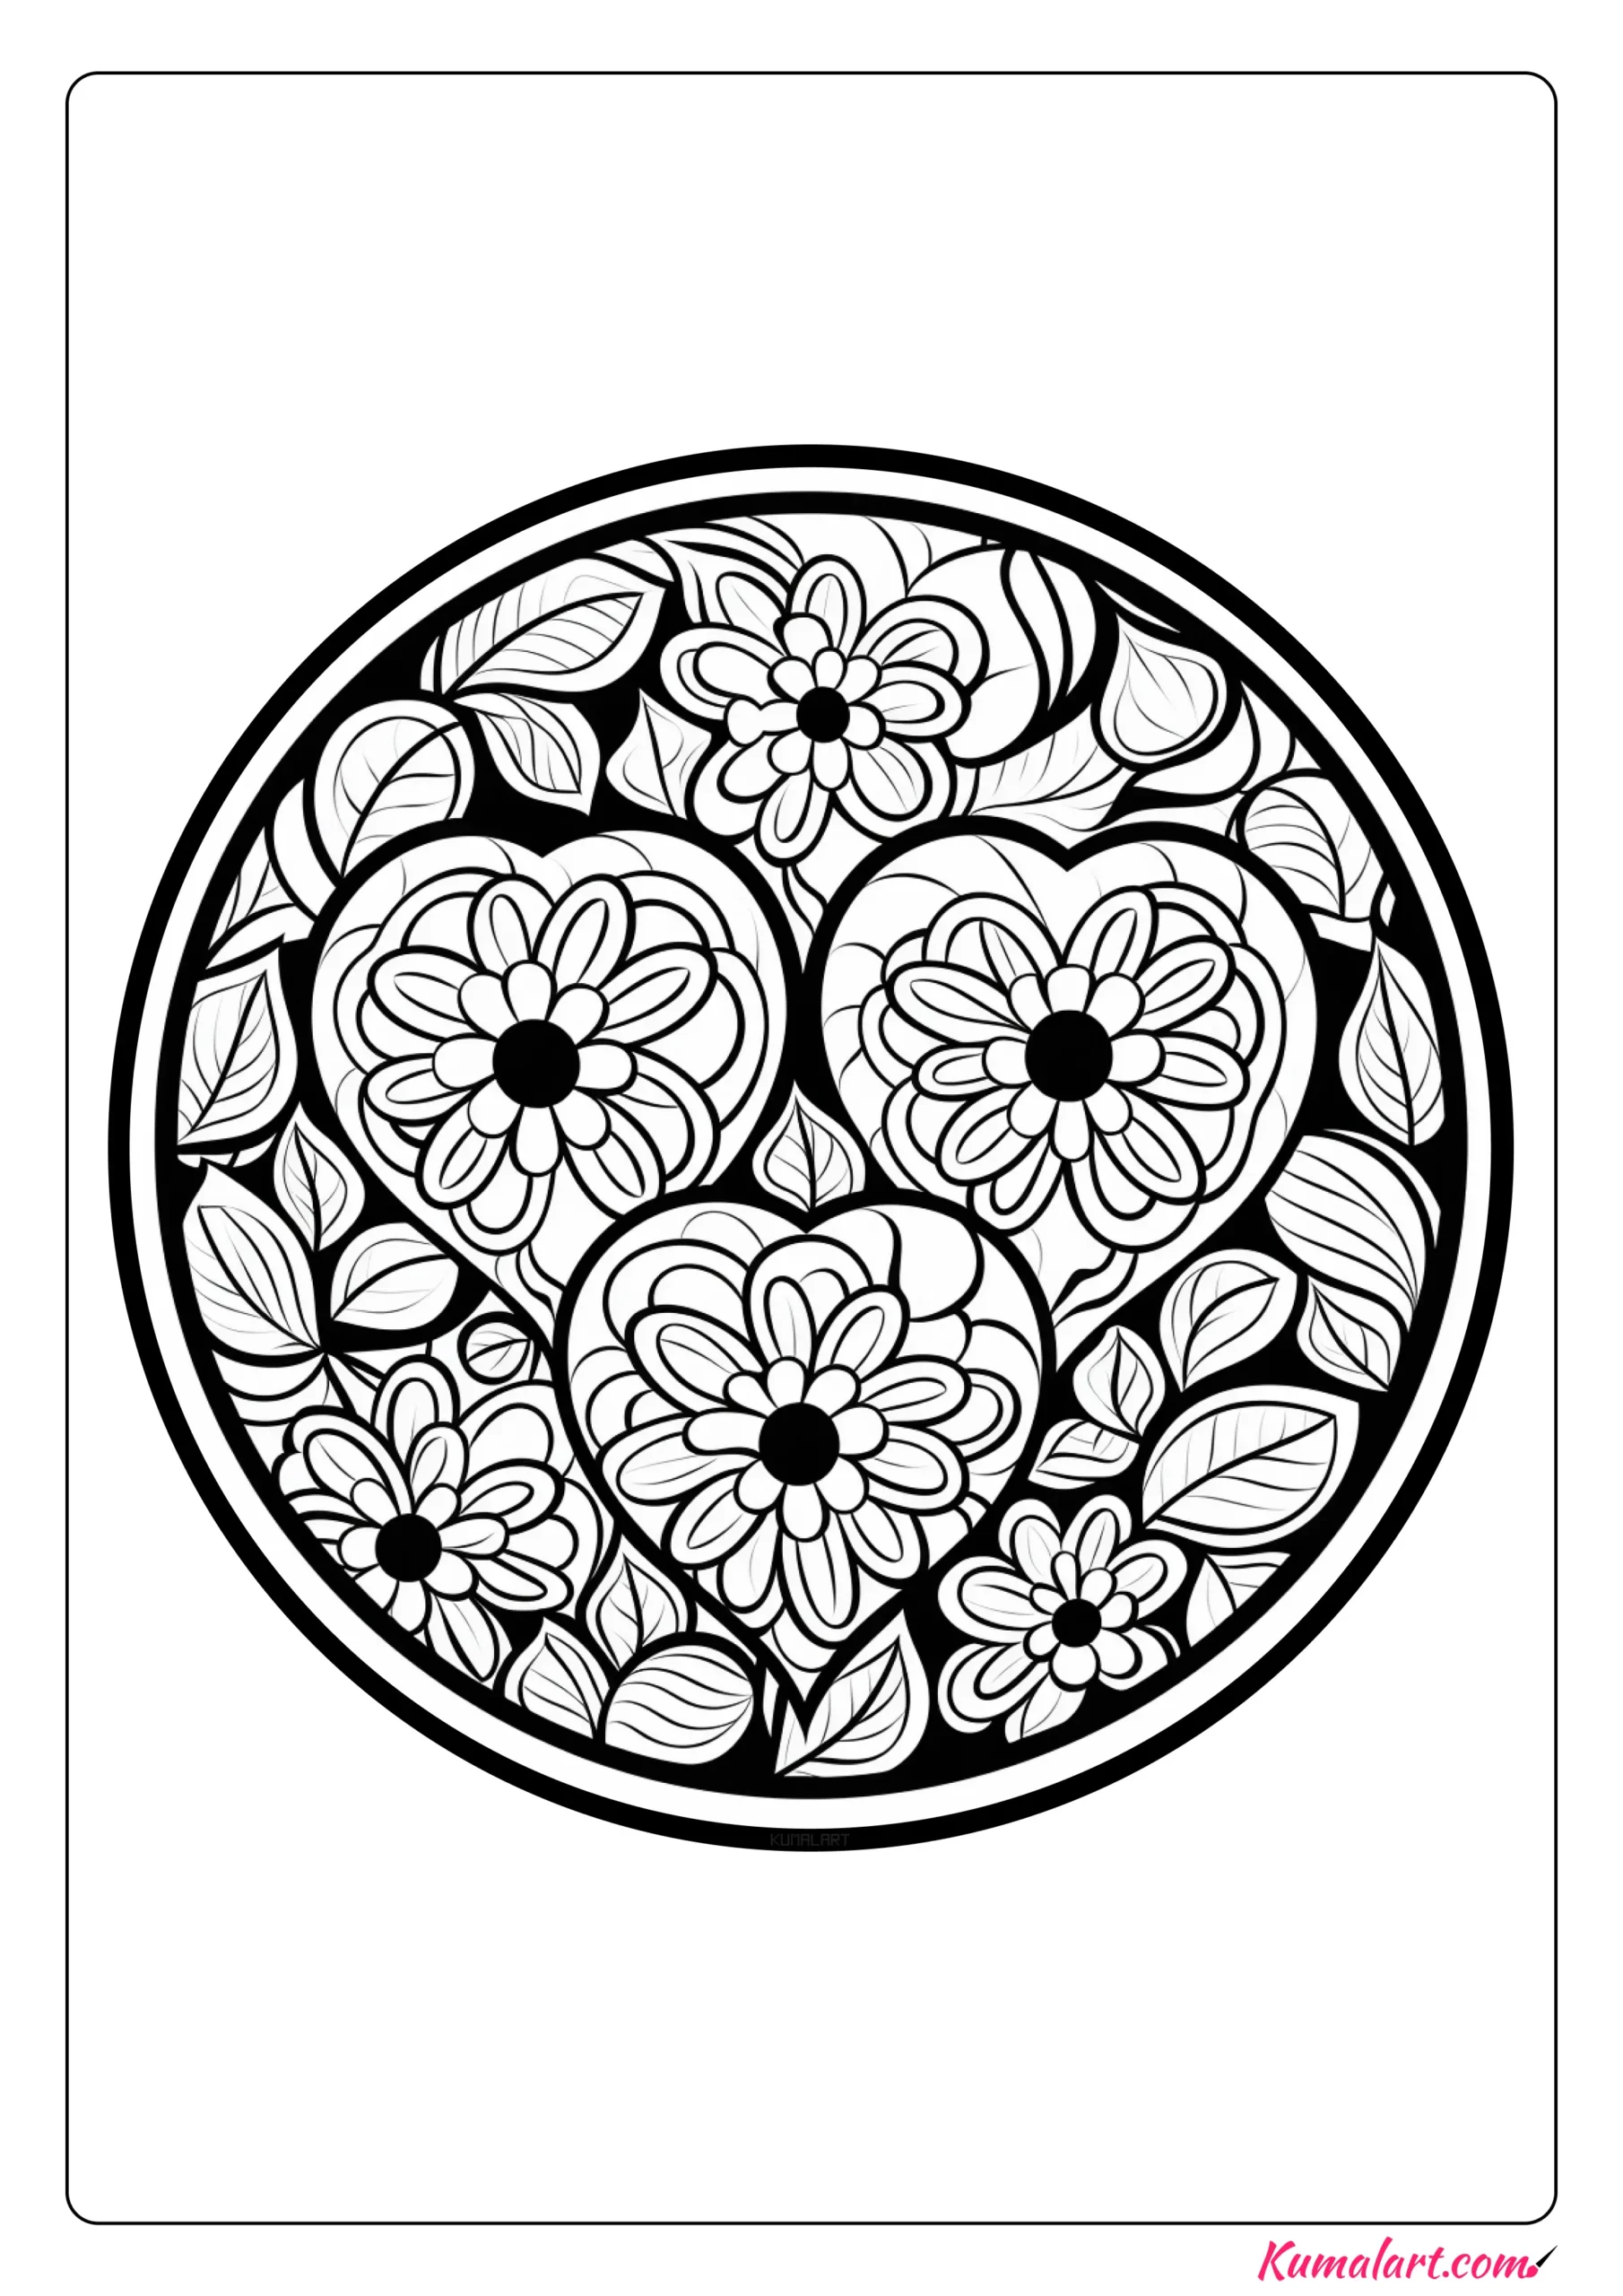 True Valentine’s Day Mandala Coloring Page